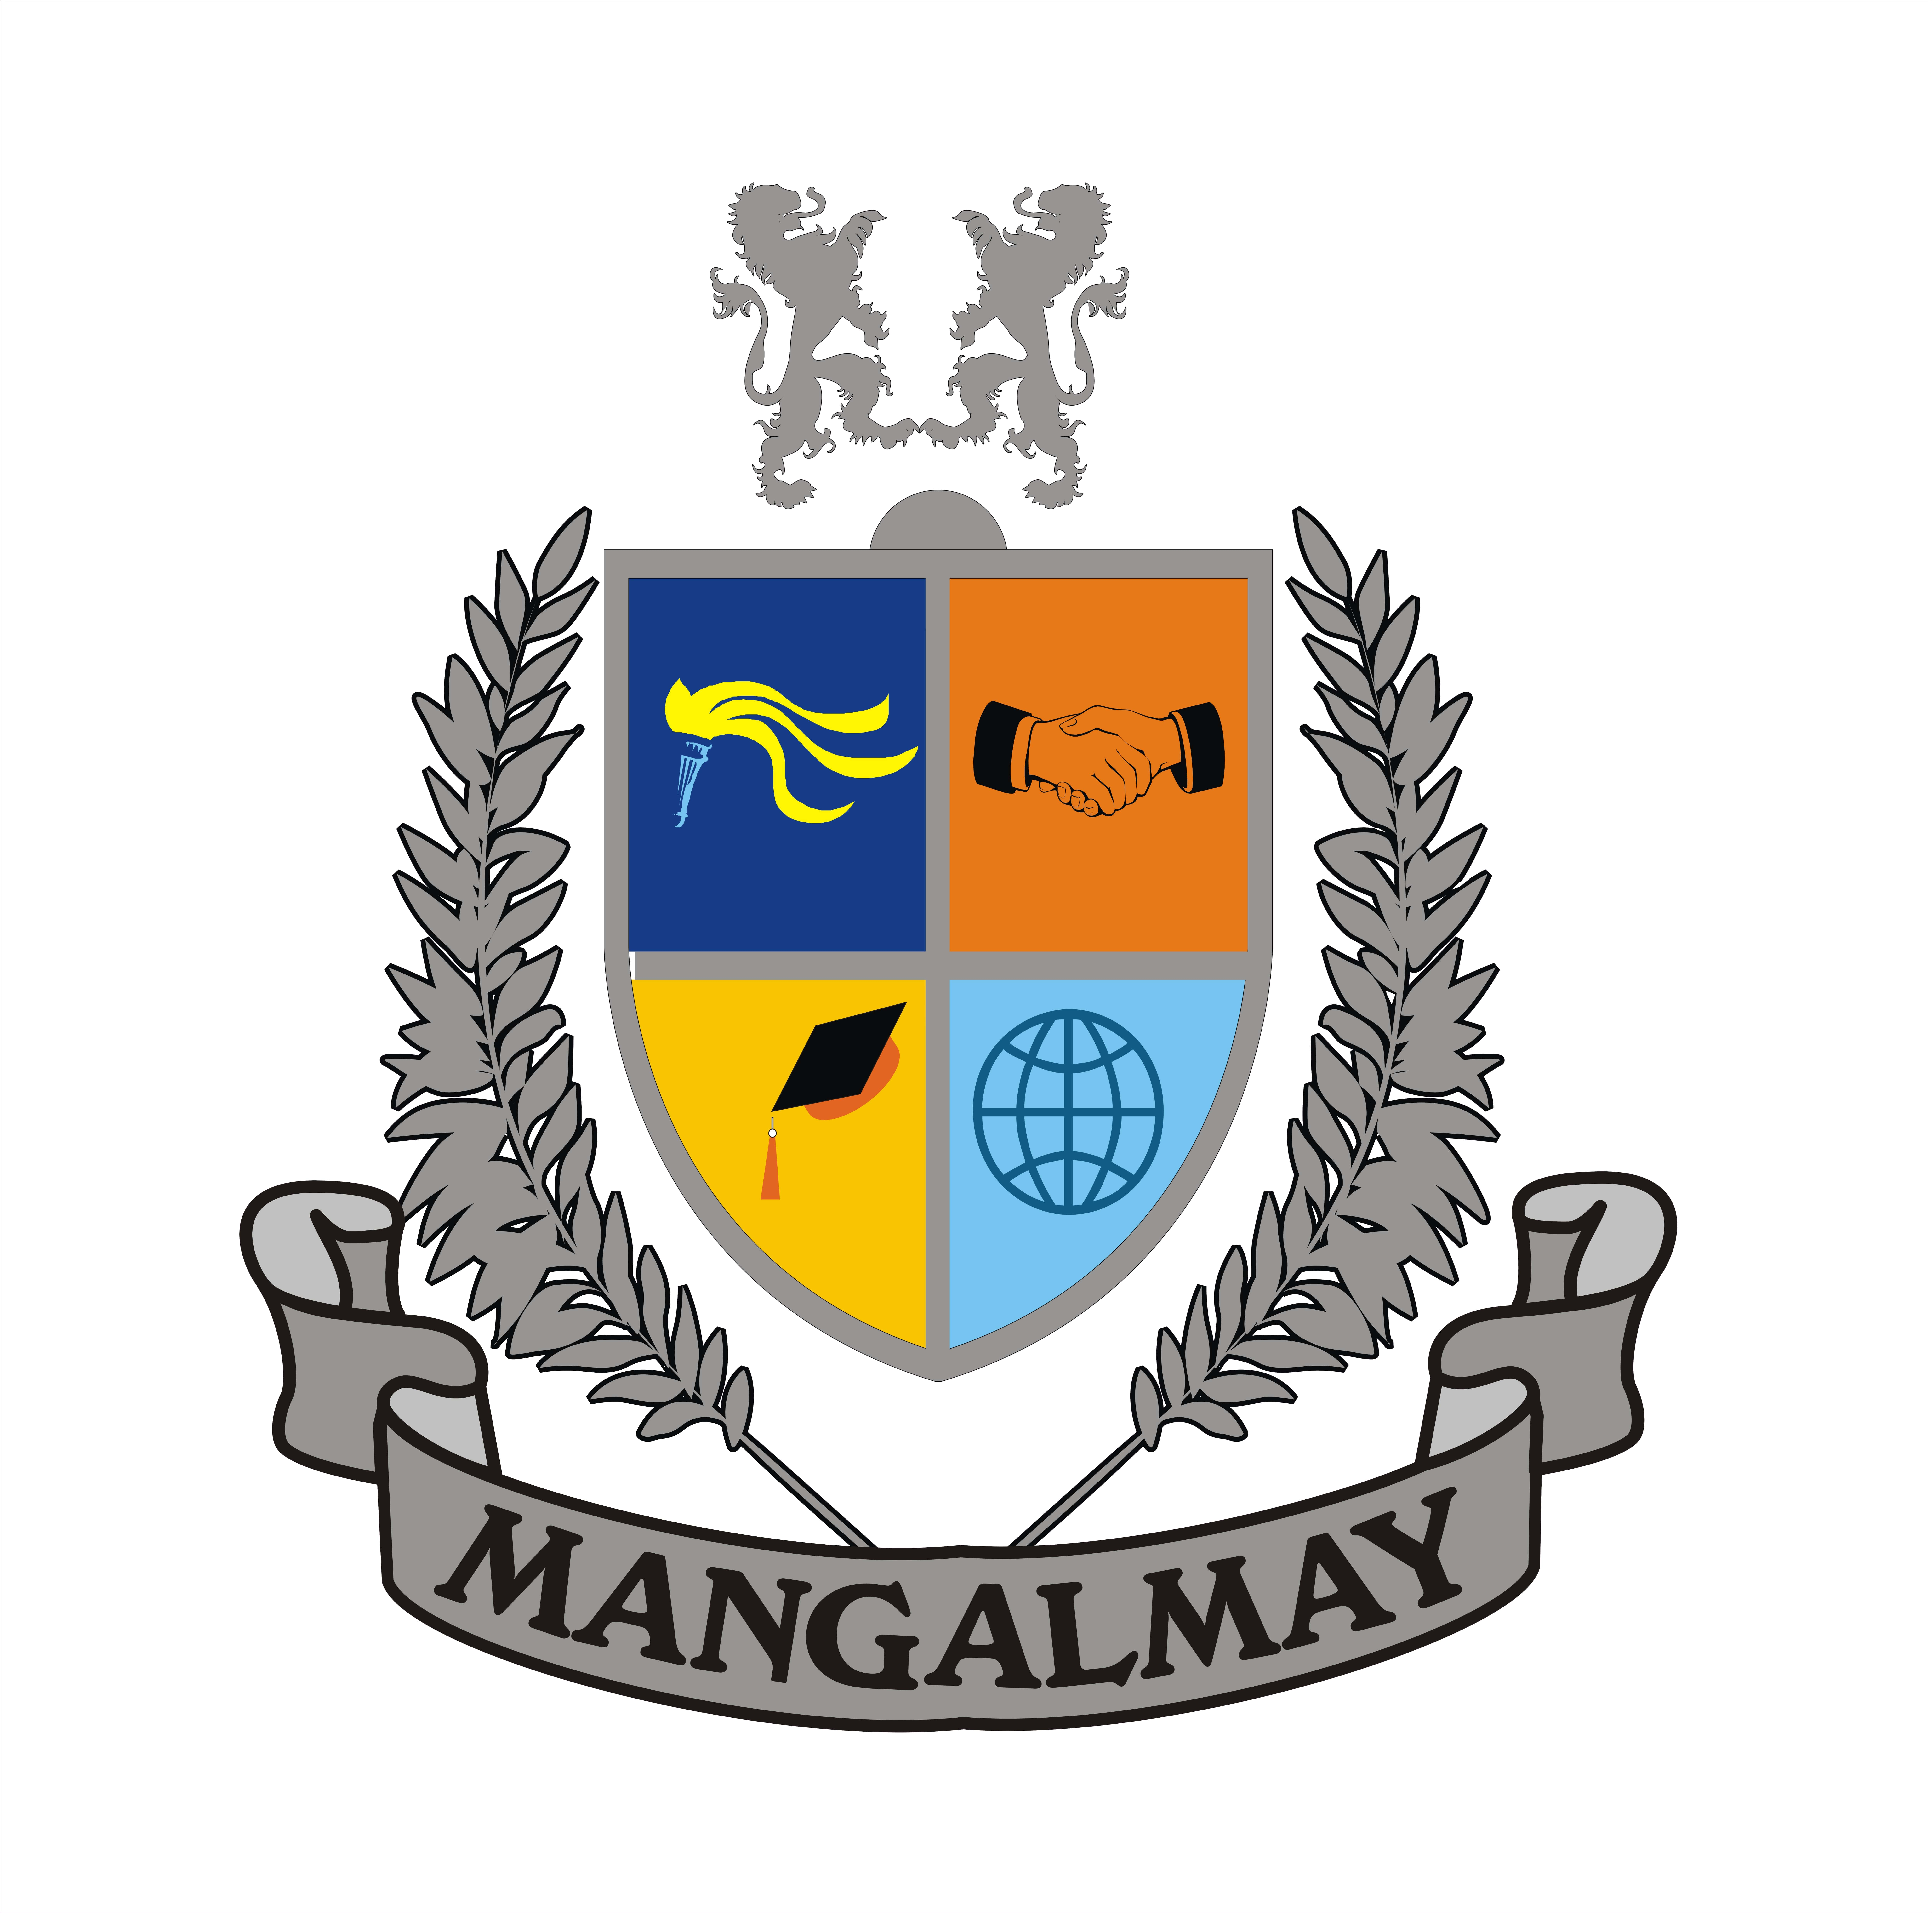 MANGALMAY INSTITUTE OF MANAGEMENT AND TECHNOLOGY